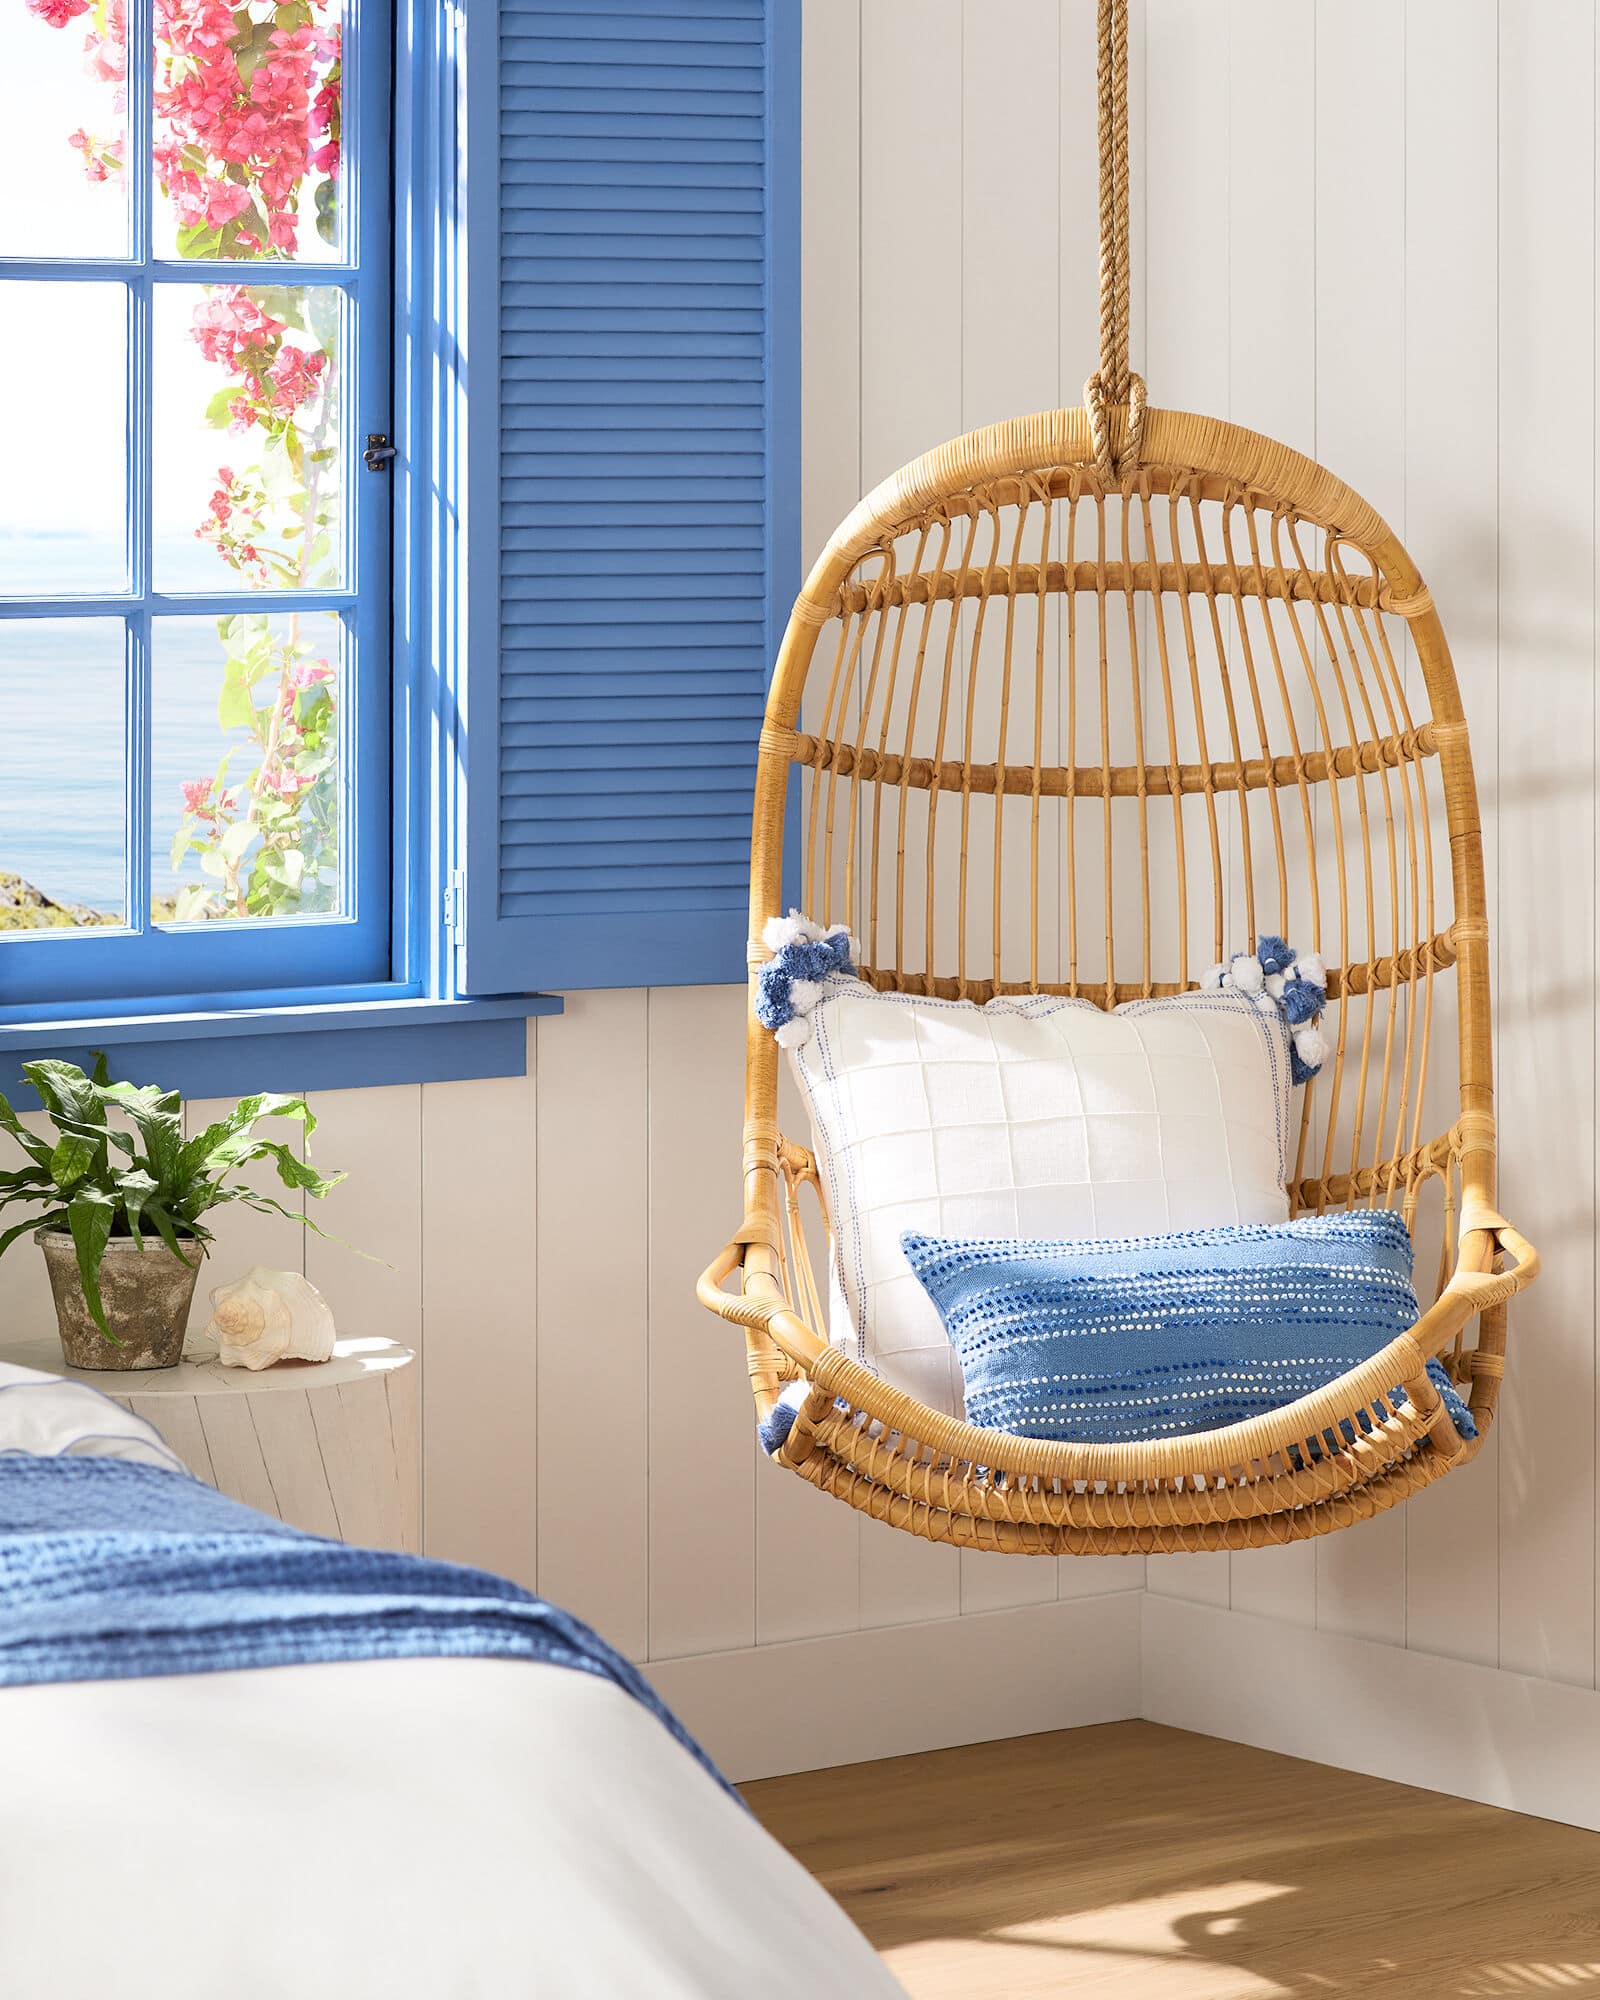 Add a Hanging Rattan Chair for a Touch of Whimsy